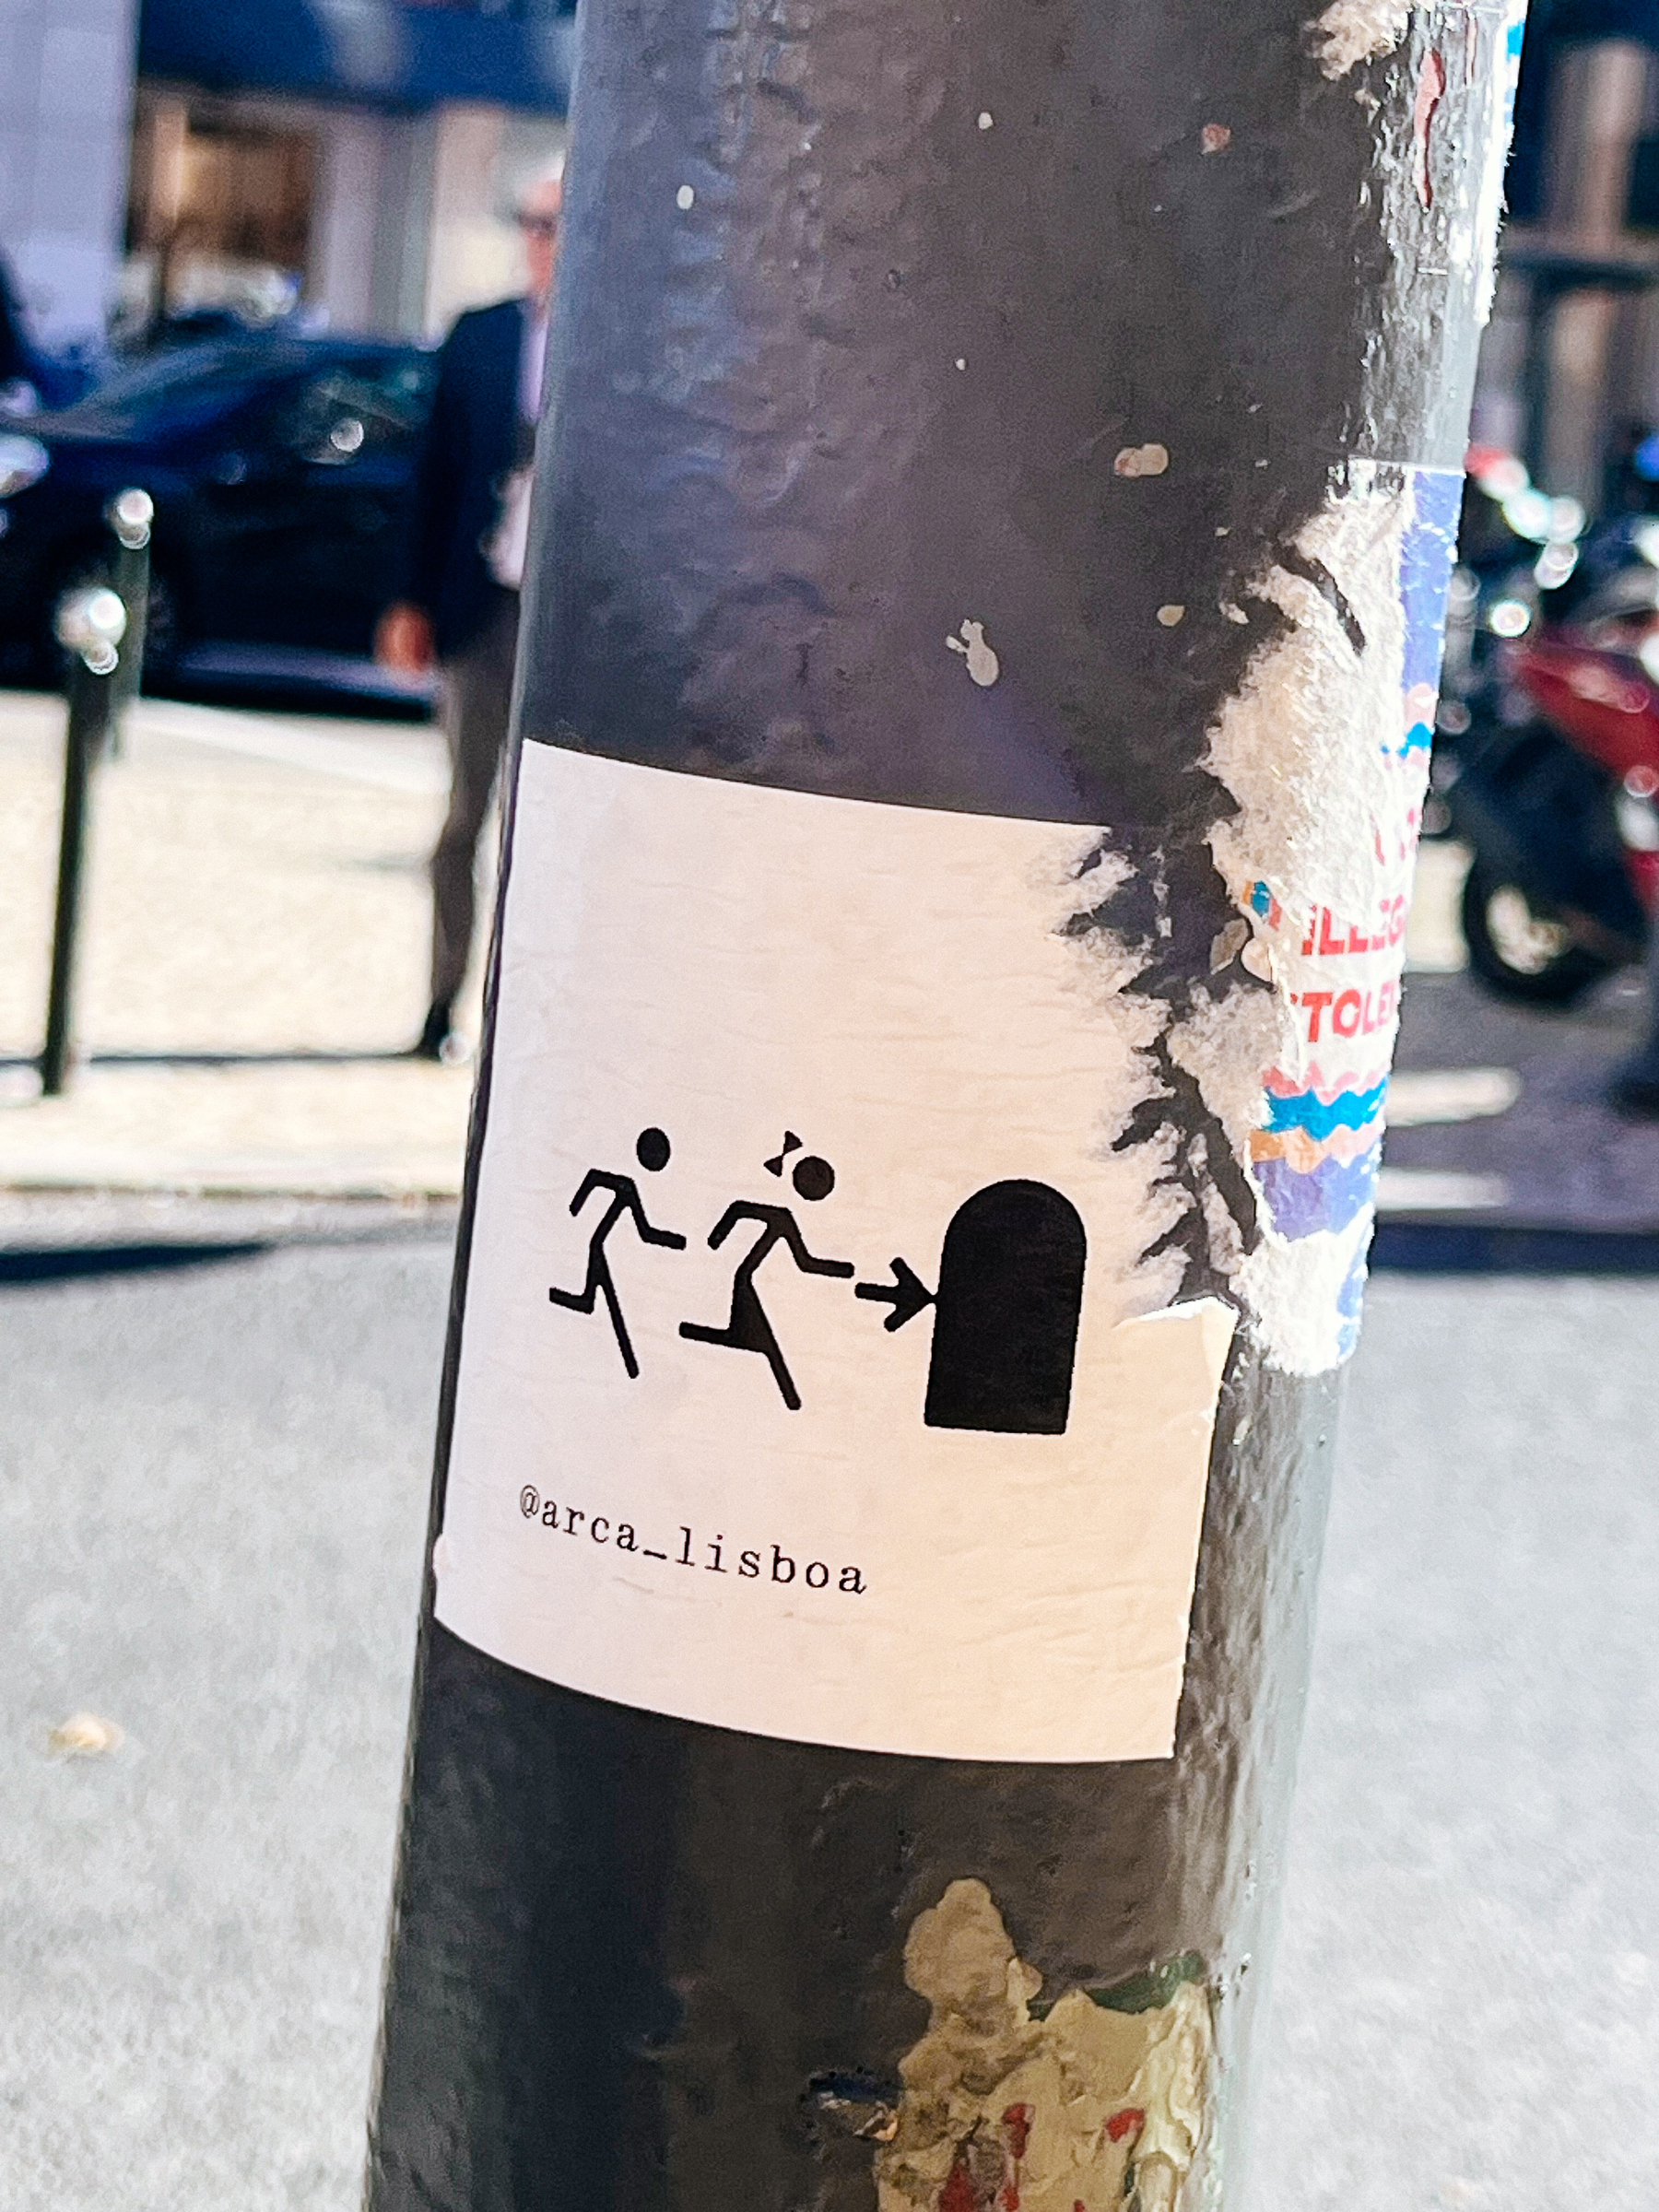 A girl and a boy stick figures run in the direction of a door. A sticker. 